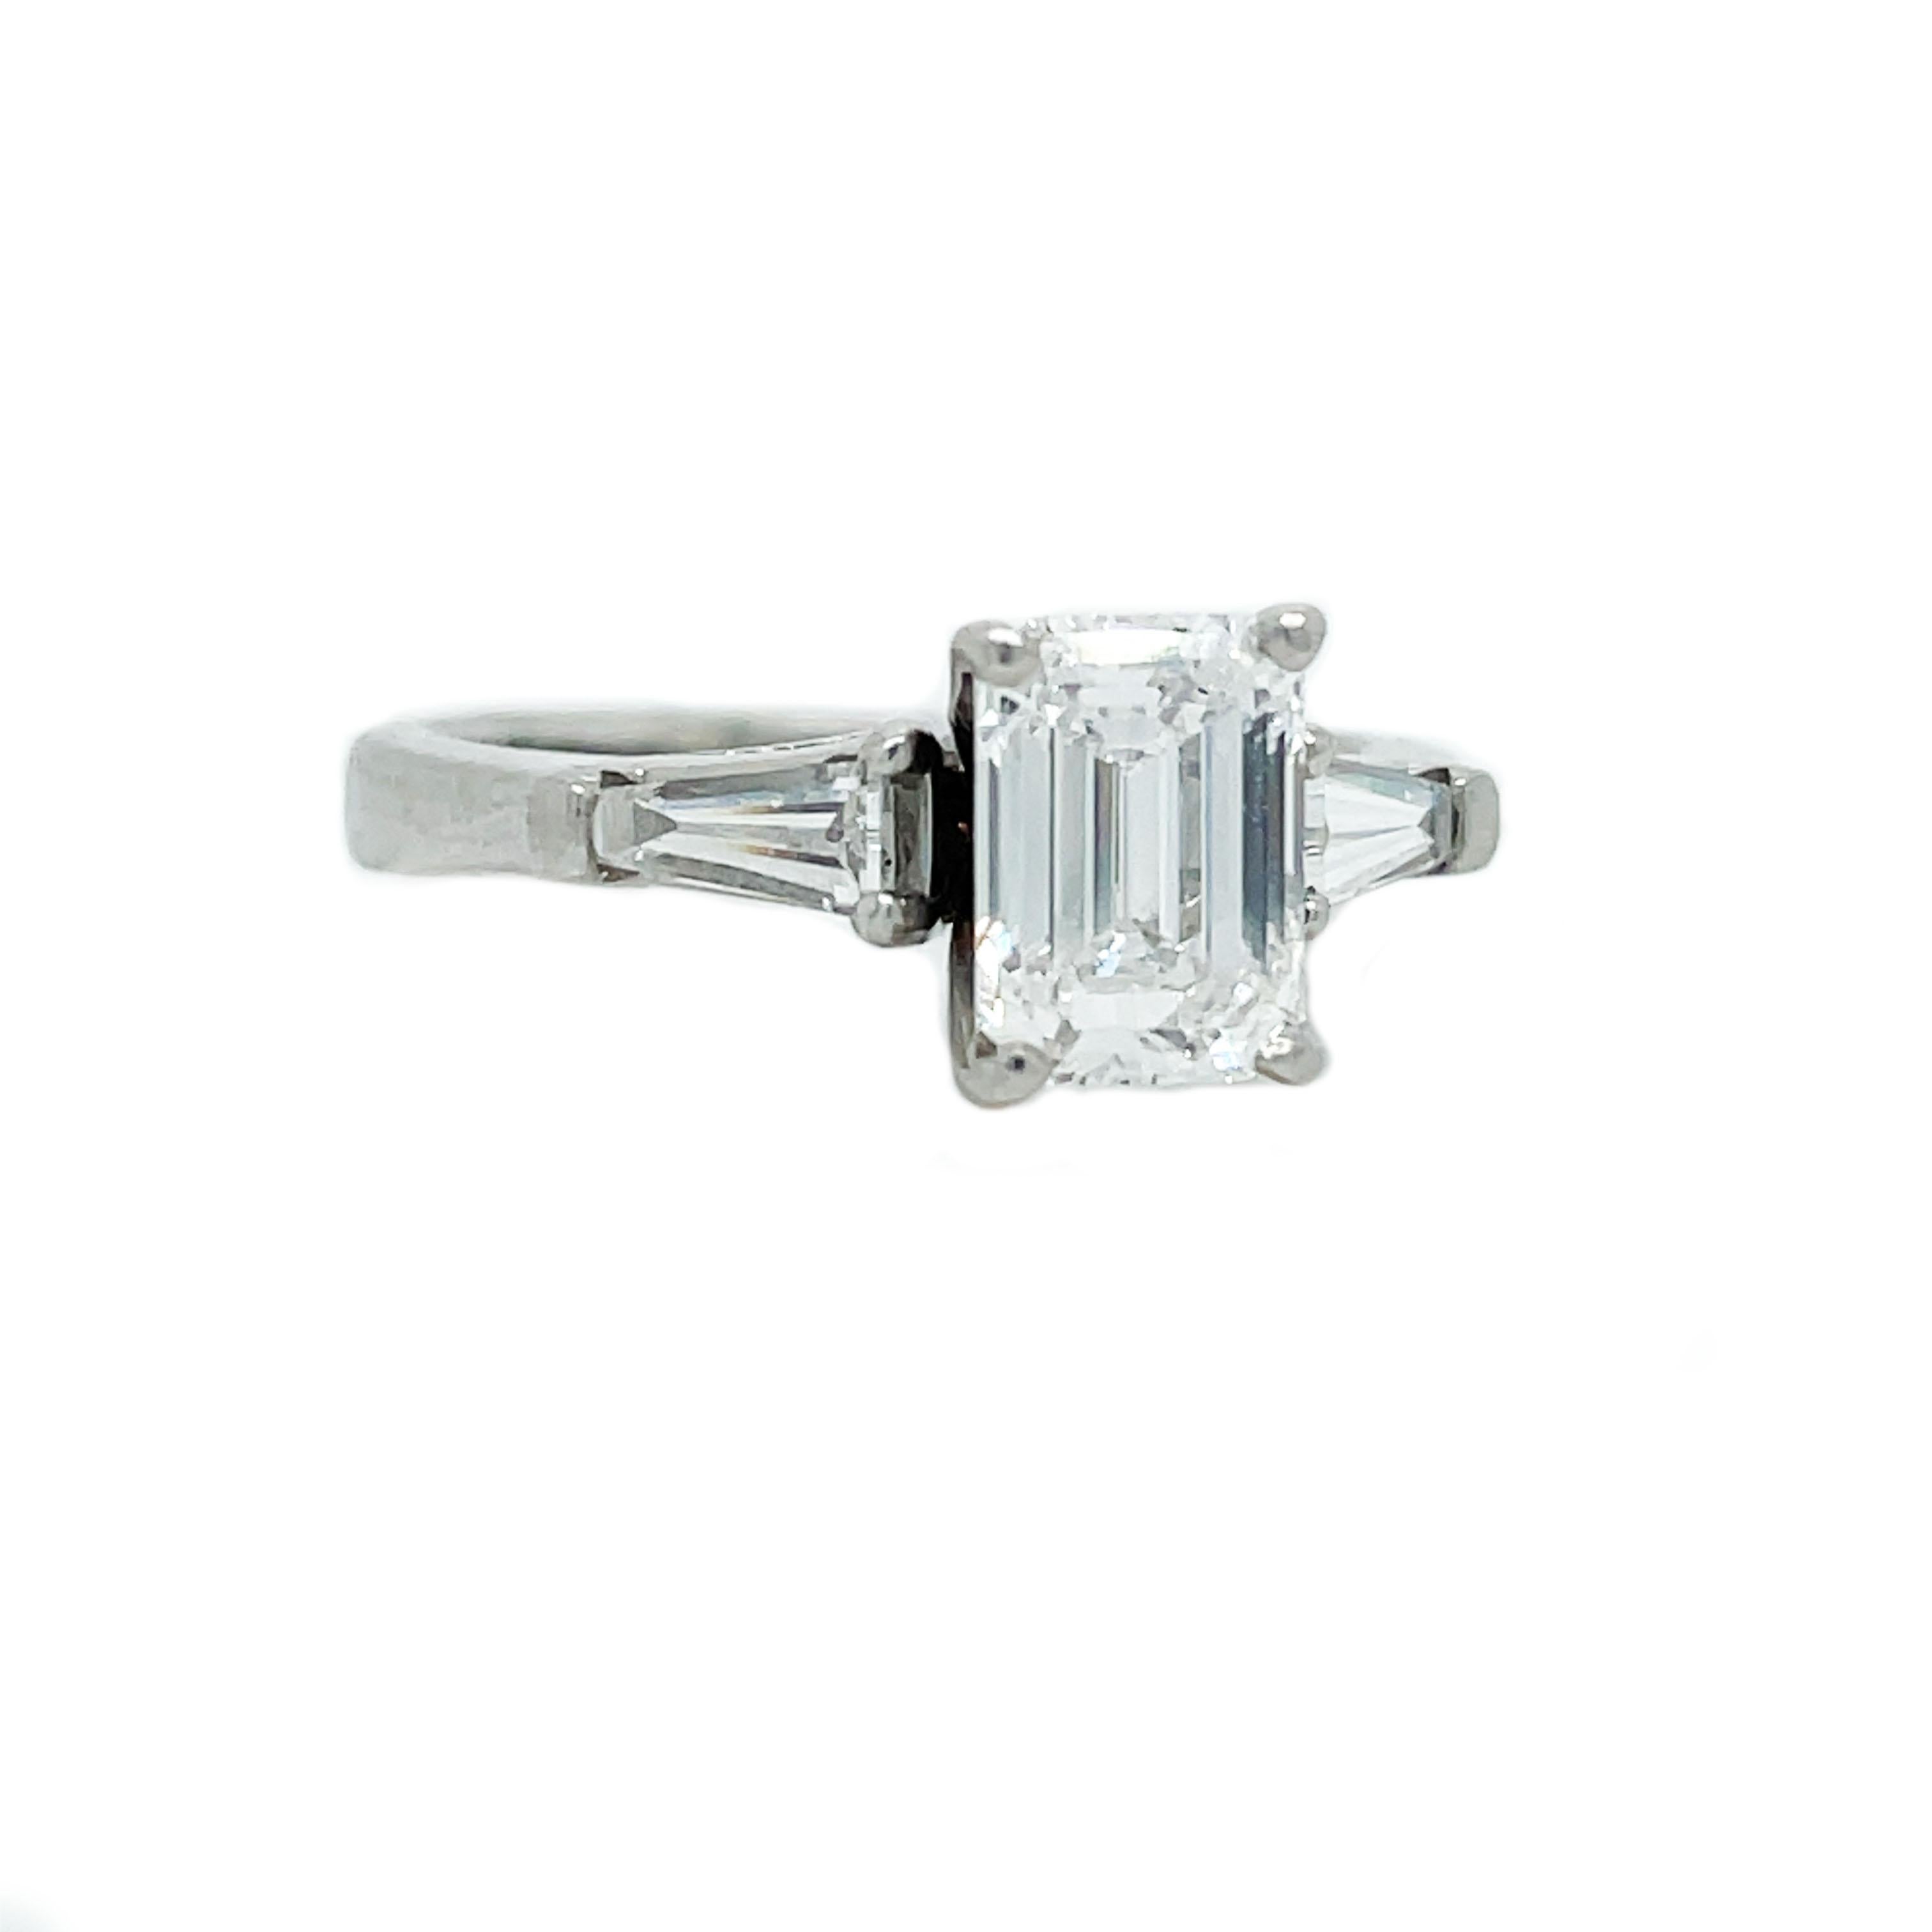 This is a killer Emerald and Baguette Diamond Engagement Ring set in Platinum GIA E VS1 Total weight 1.54ct. ! This ring highlights an icy white emerald-cut diamond cushioned between two shining baguette diamonds encased in a Platinum setting. This